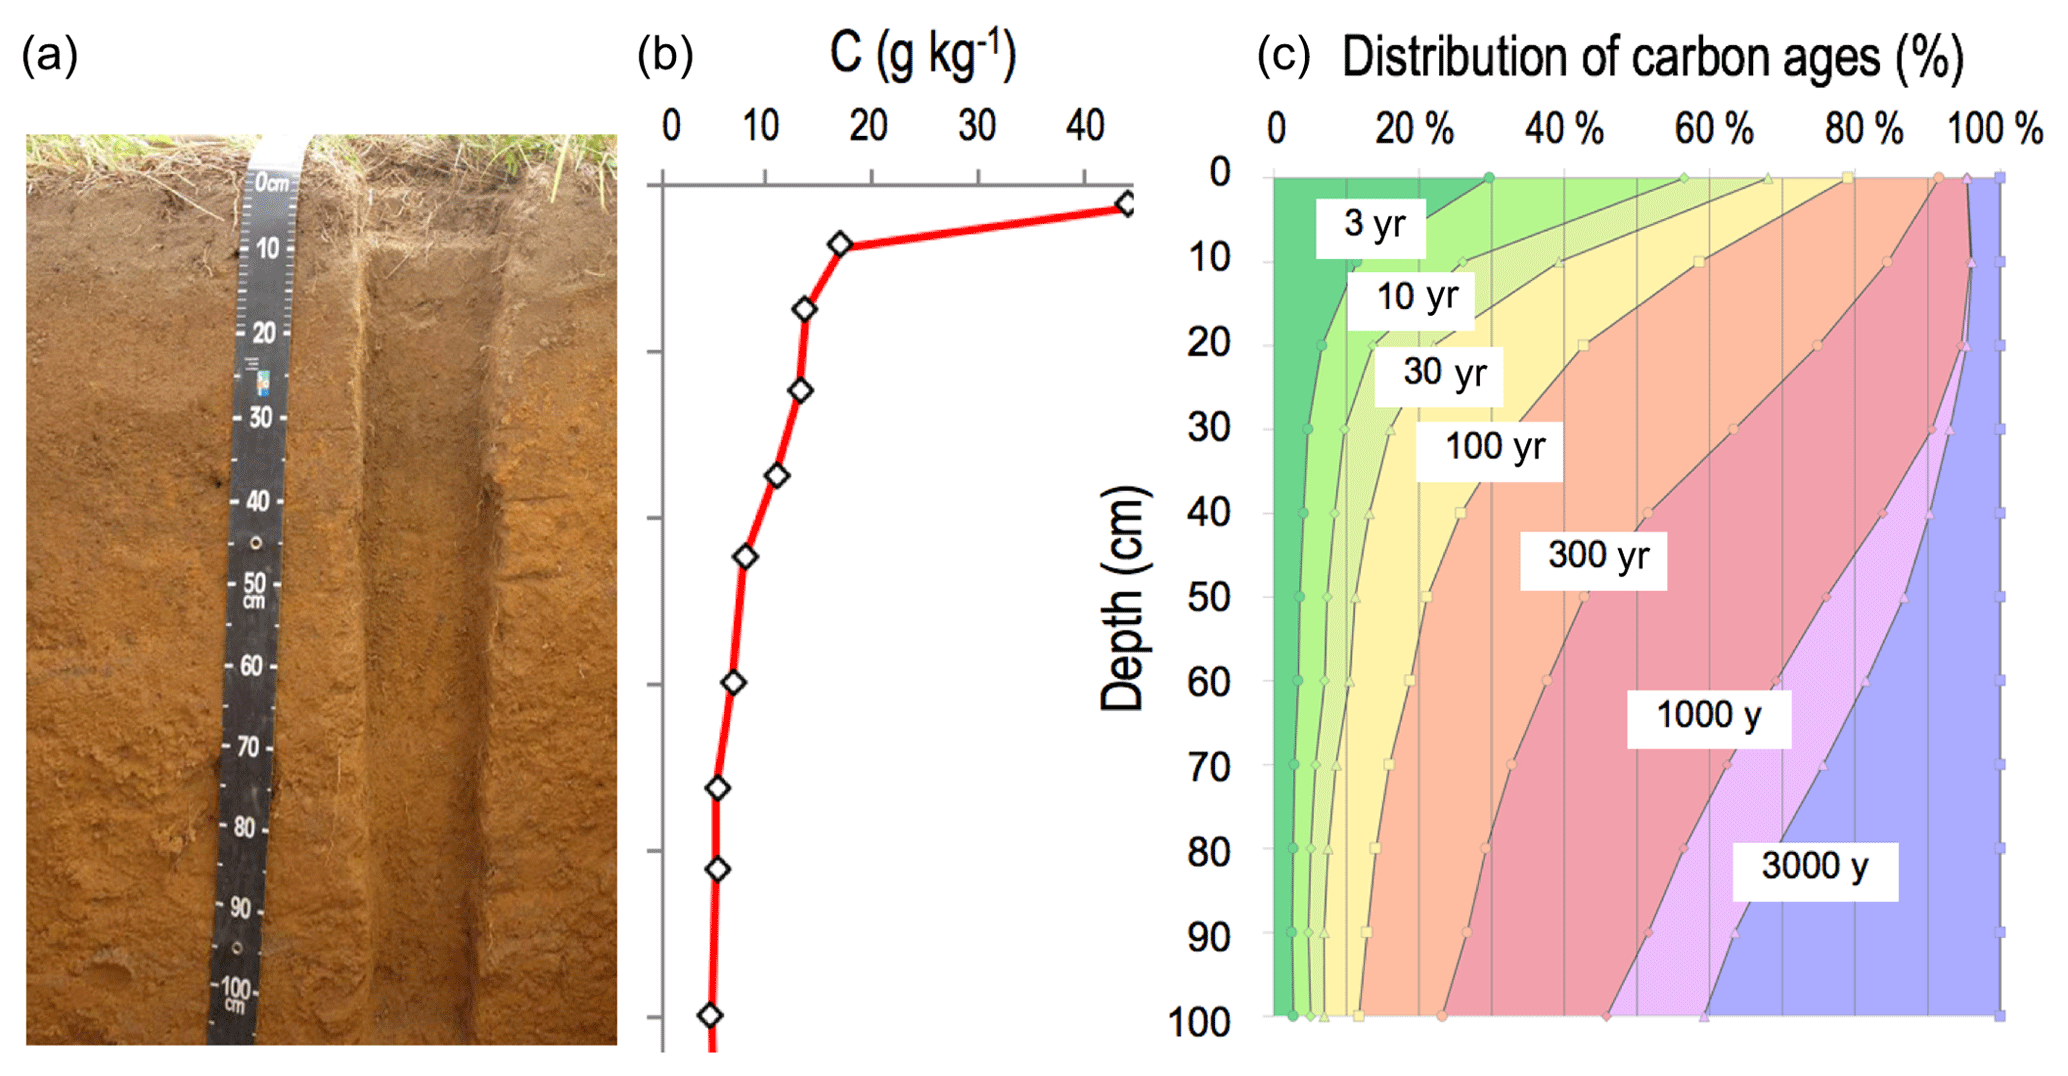 Bg Reviews And Syntheses The Mechanisms Underlying Carbon Storage In Soil